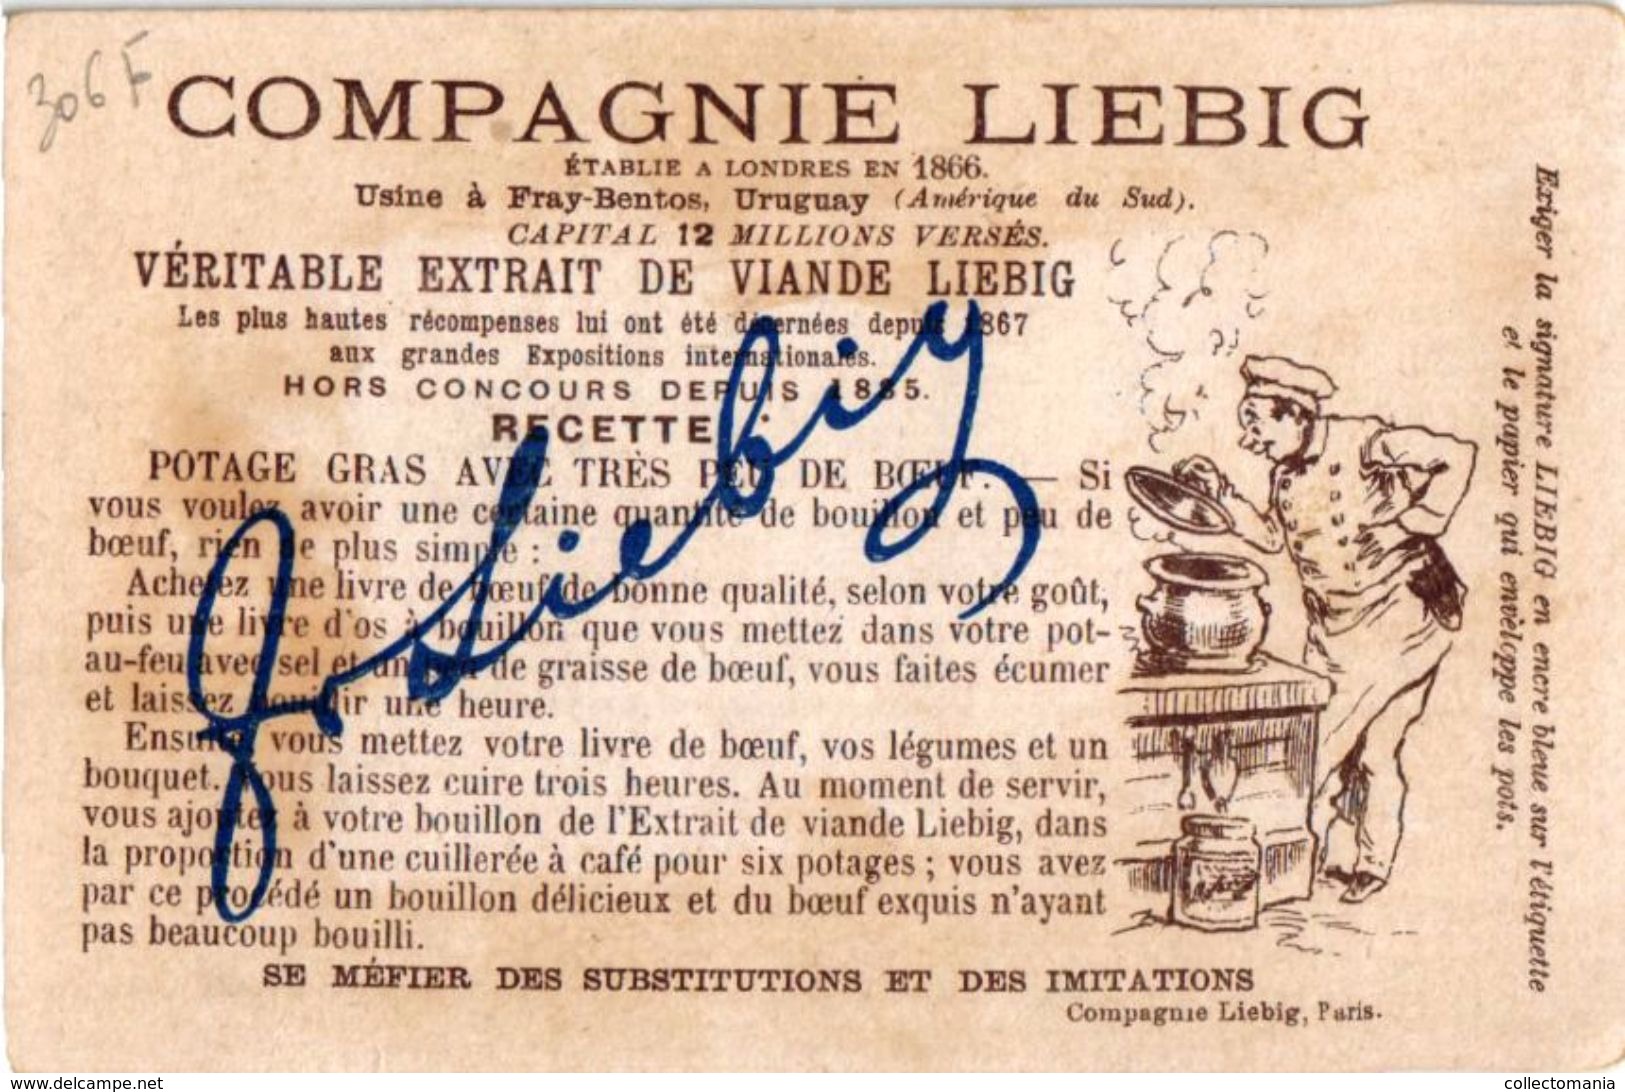 6 cards complete set number 306 Compagnie Liebig Compagnie c891 RARE, litho Plaisirs de voyage, aventura in ferrovia